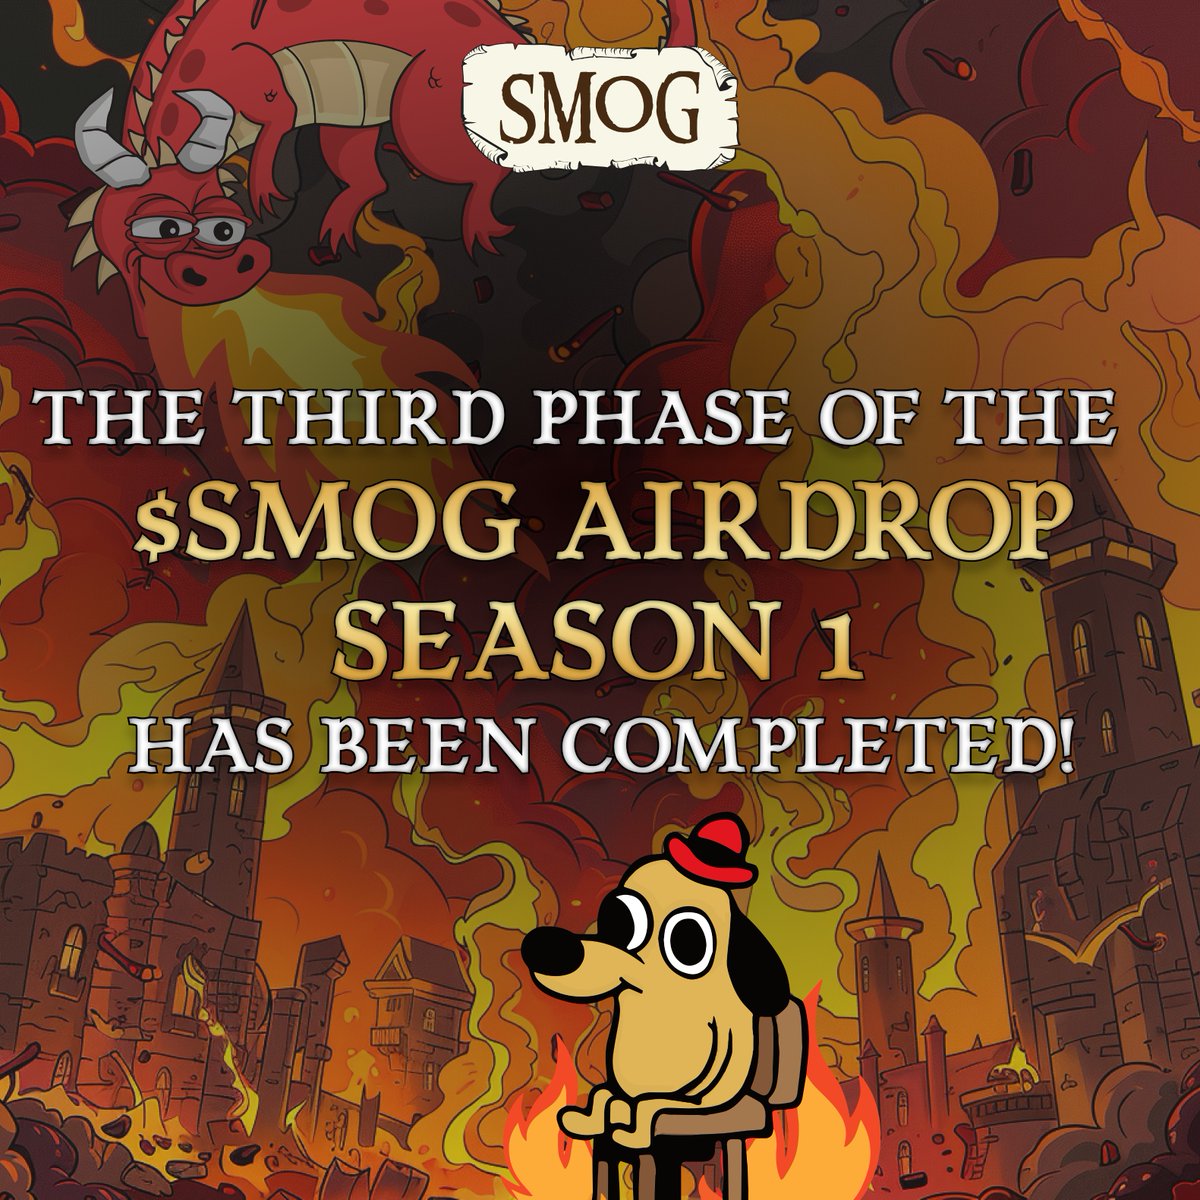 🐉 The third phase of the $SMOG #Airdrop is now complete! 🎉 Join our community for more opportunities to earn rewards Season 2! 🔥 Gain XP by #Trading $SMOG and completing daily quests on #Zealy 💰🏆 bit.ly/BuySmog #SmogSwap #TradeSmog #Solana